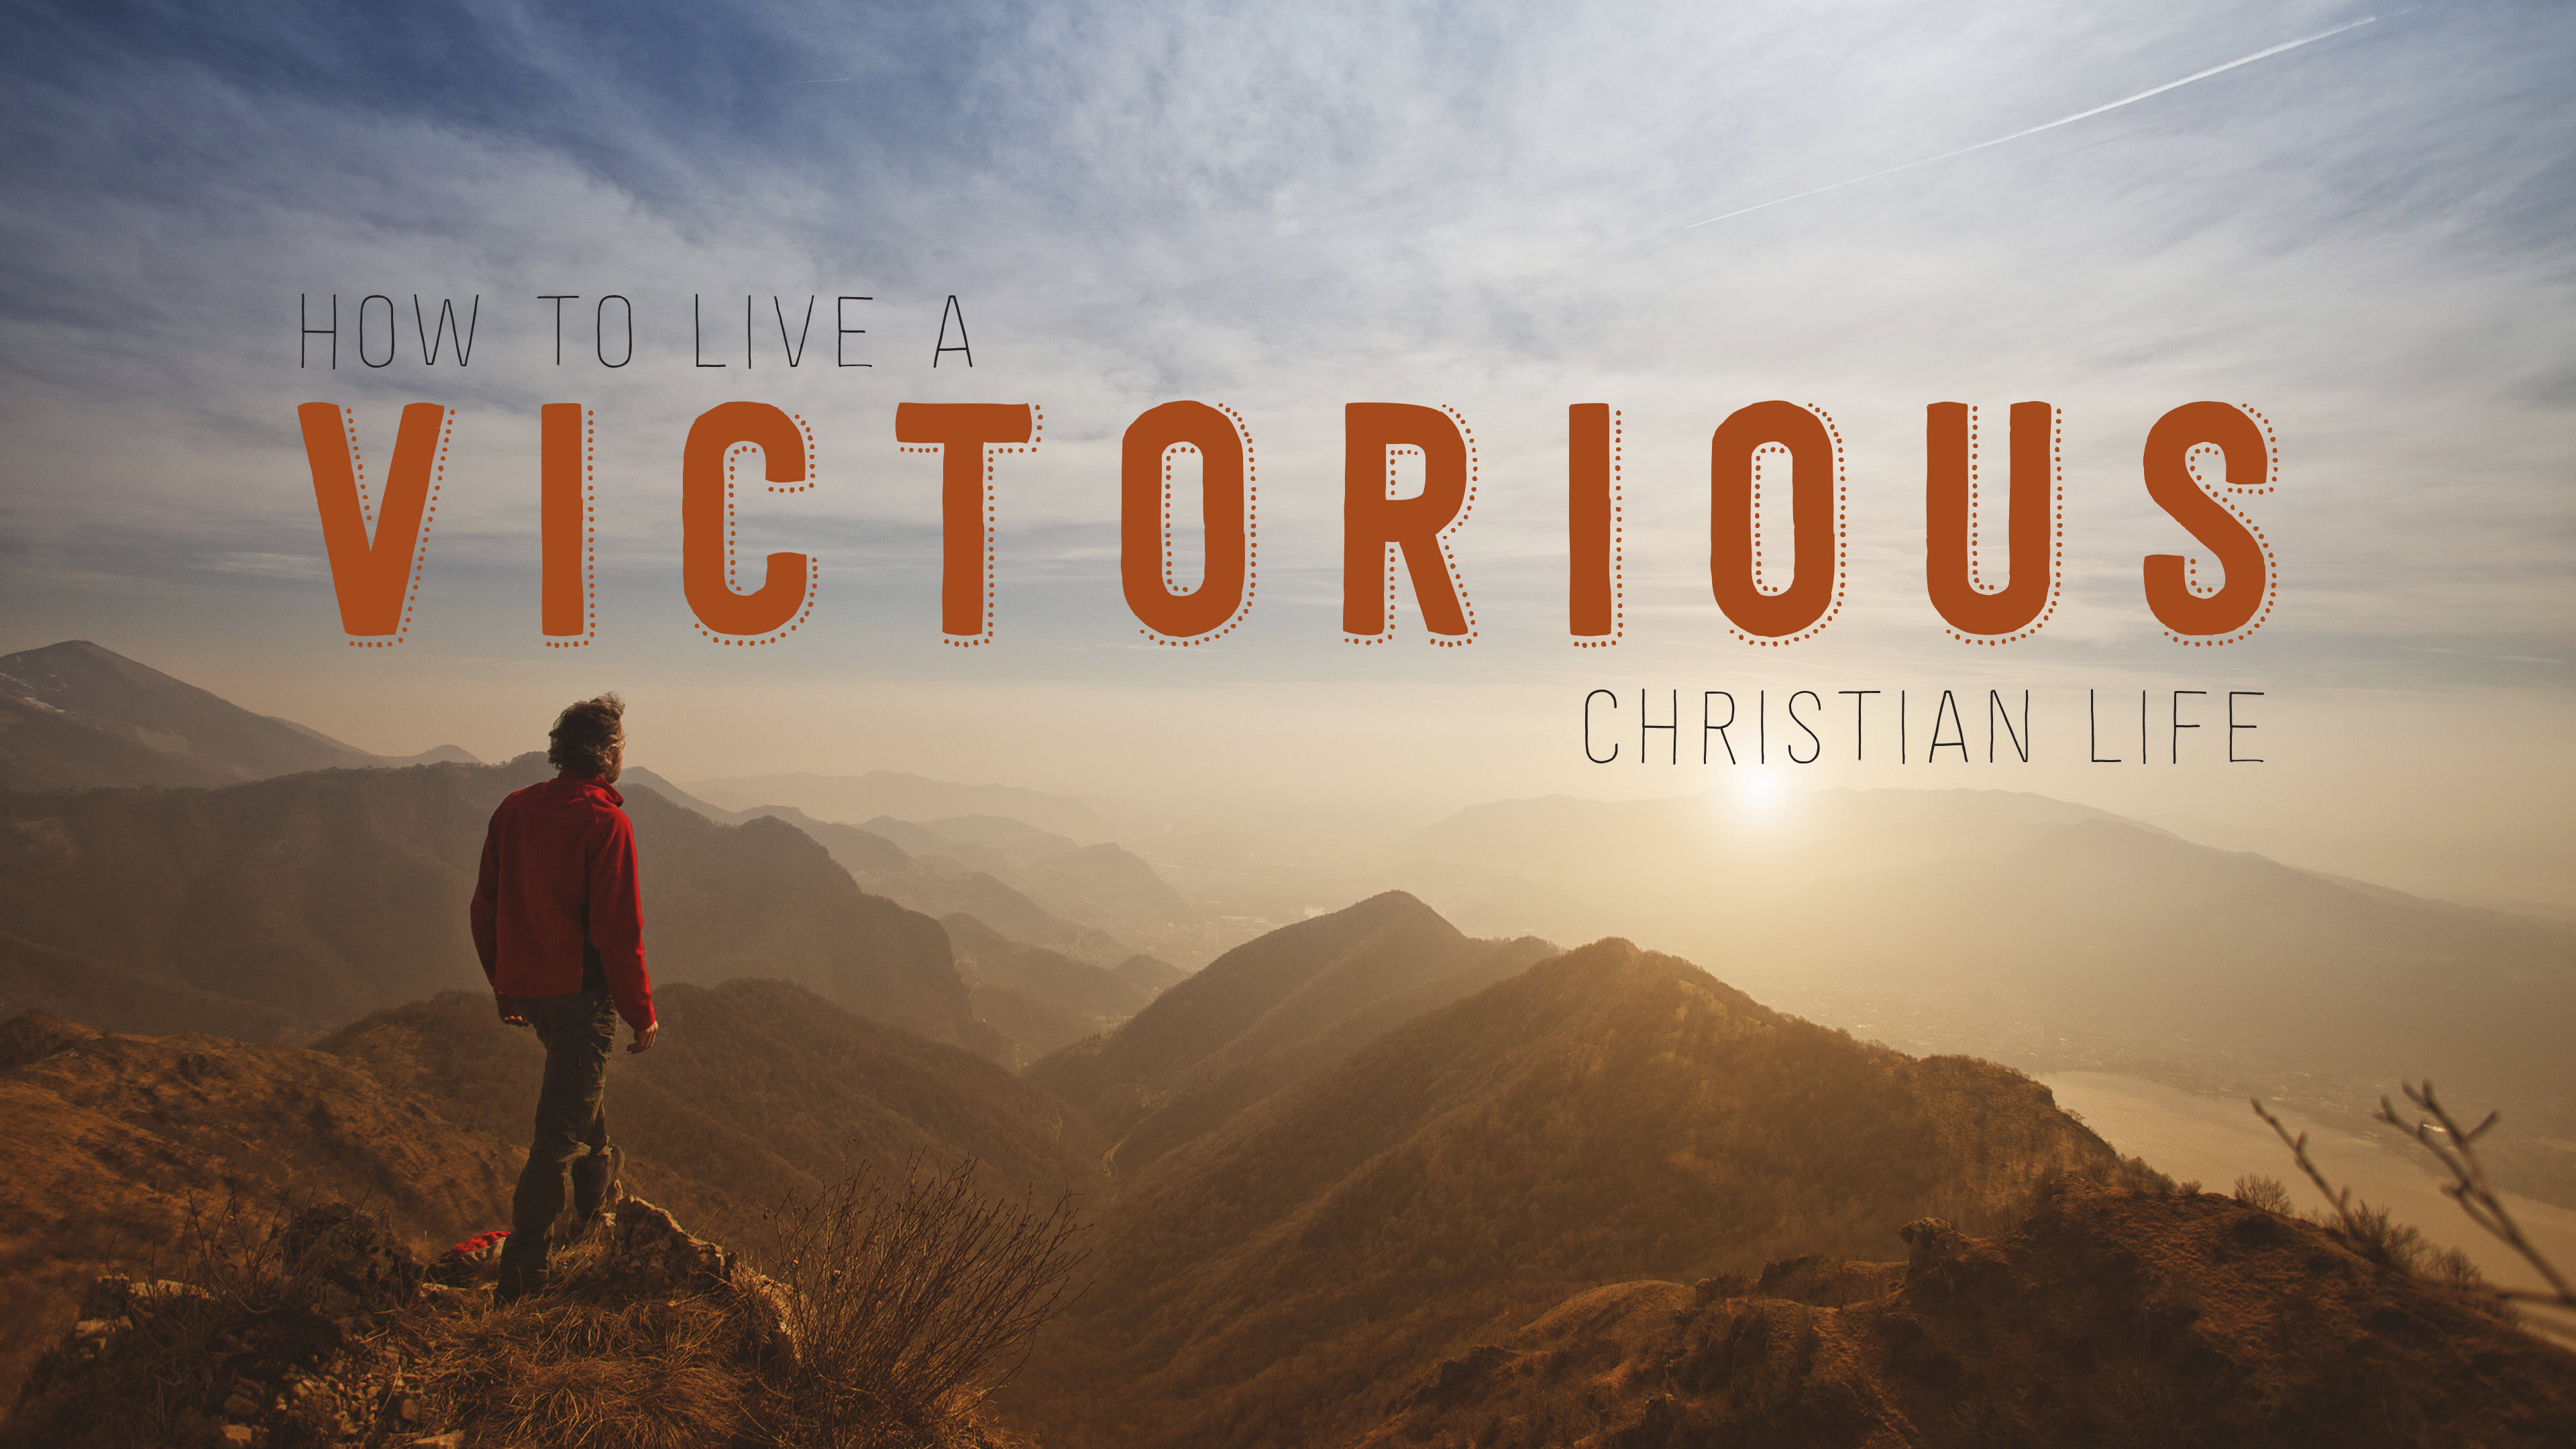 how to live the victorious christian life